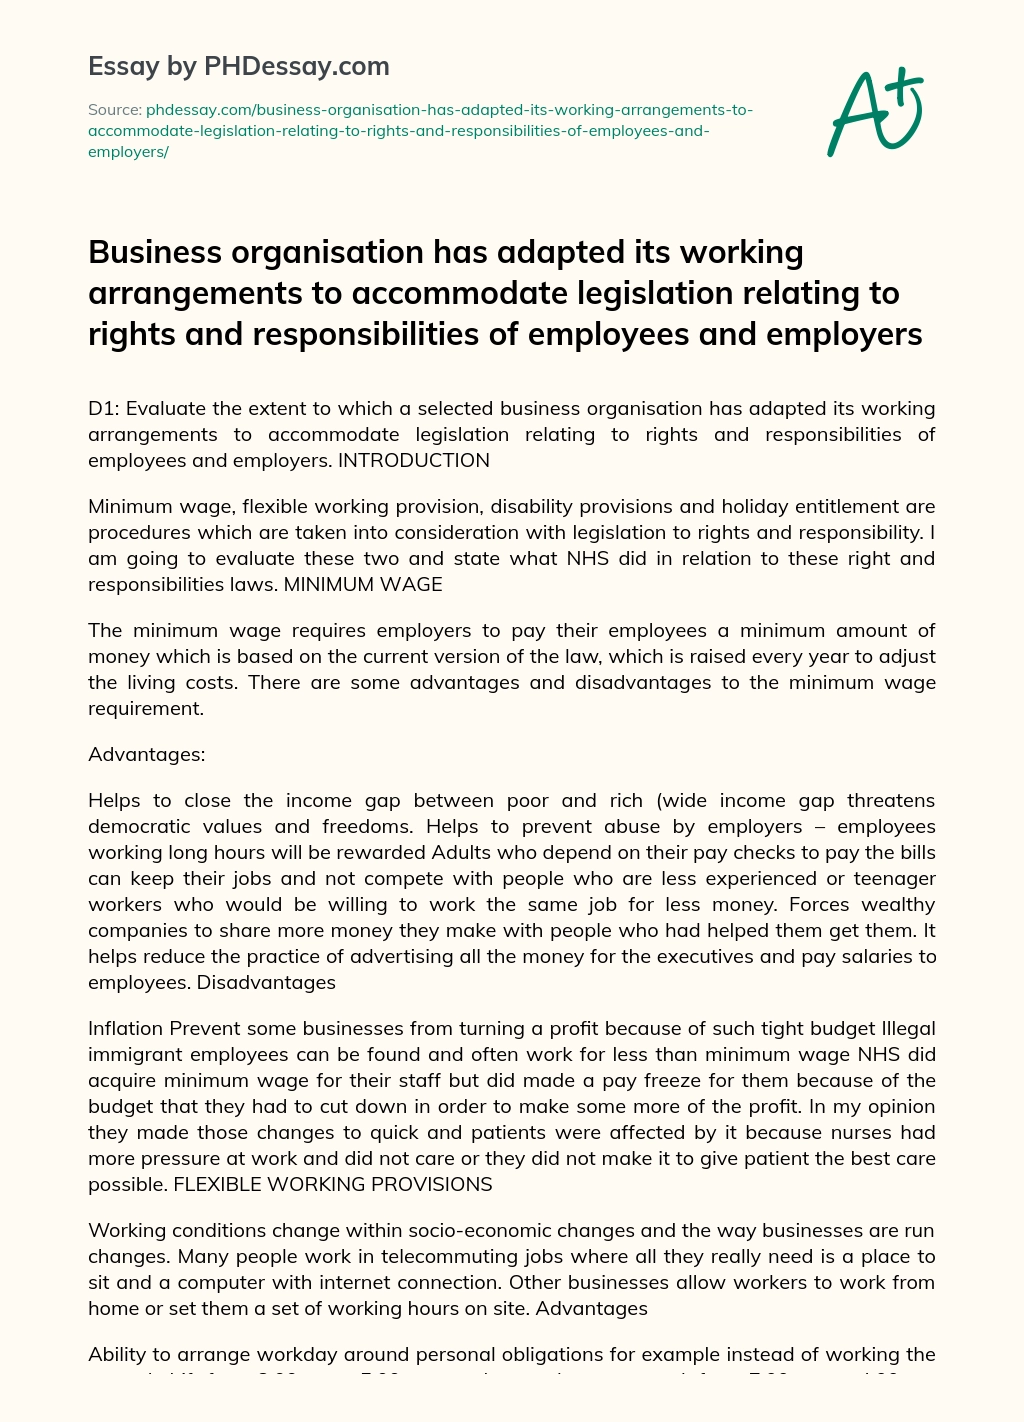 Business organisation has adapted its working arrangements to accommodate legislation relating to rights and responsibilities of employees and employers essay